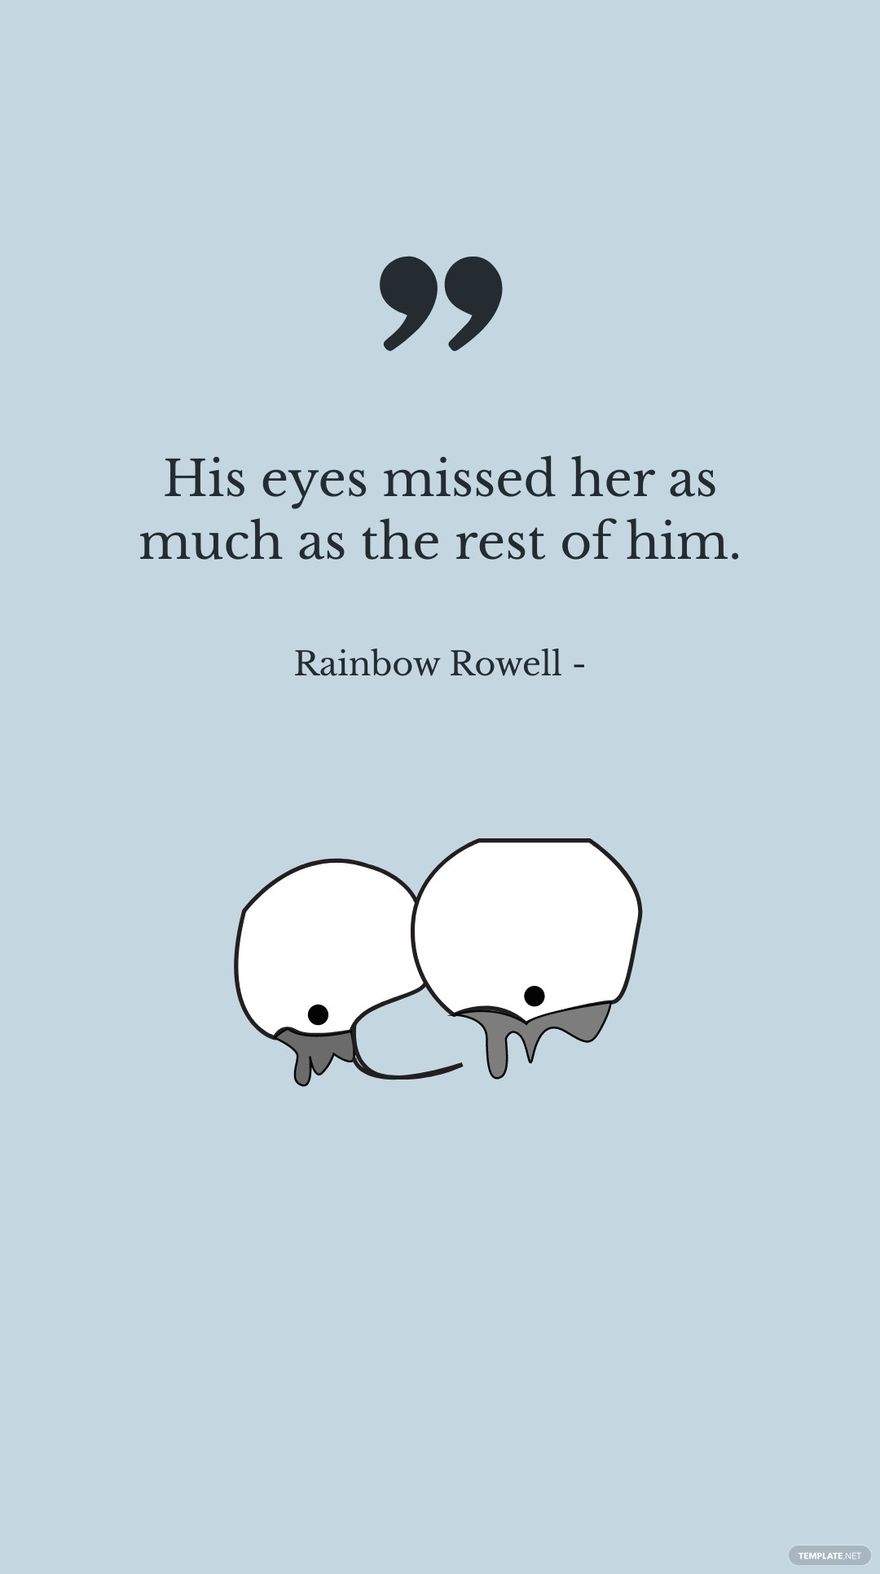 Free Rainbow Rowell - His eyes missed her as much as the rest of him.